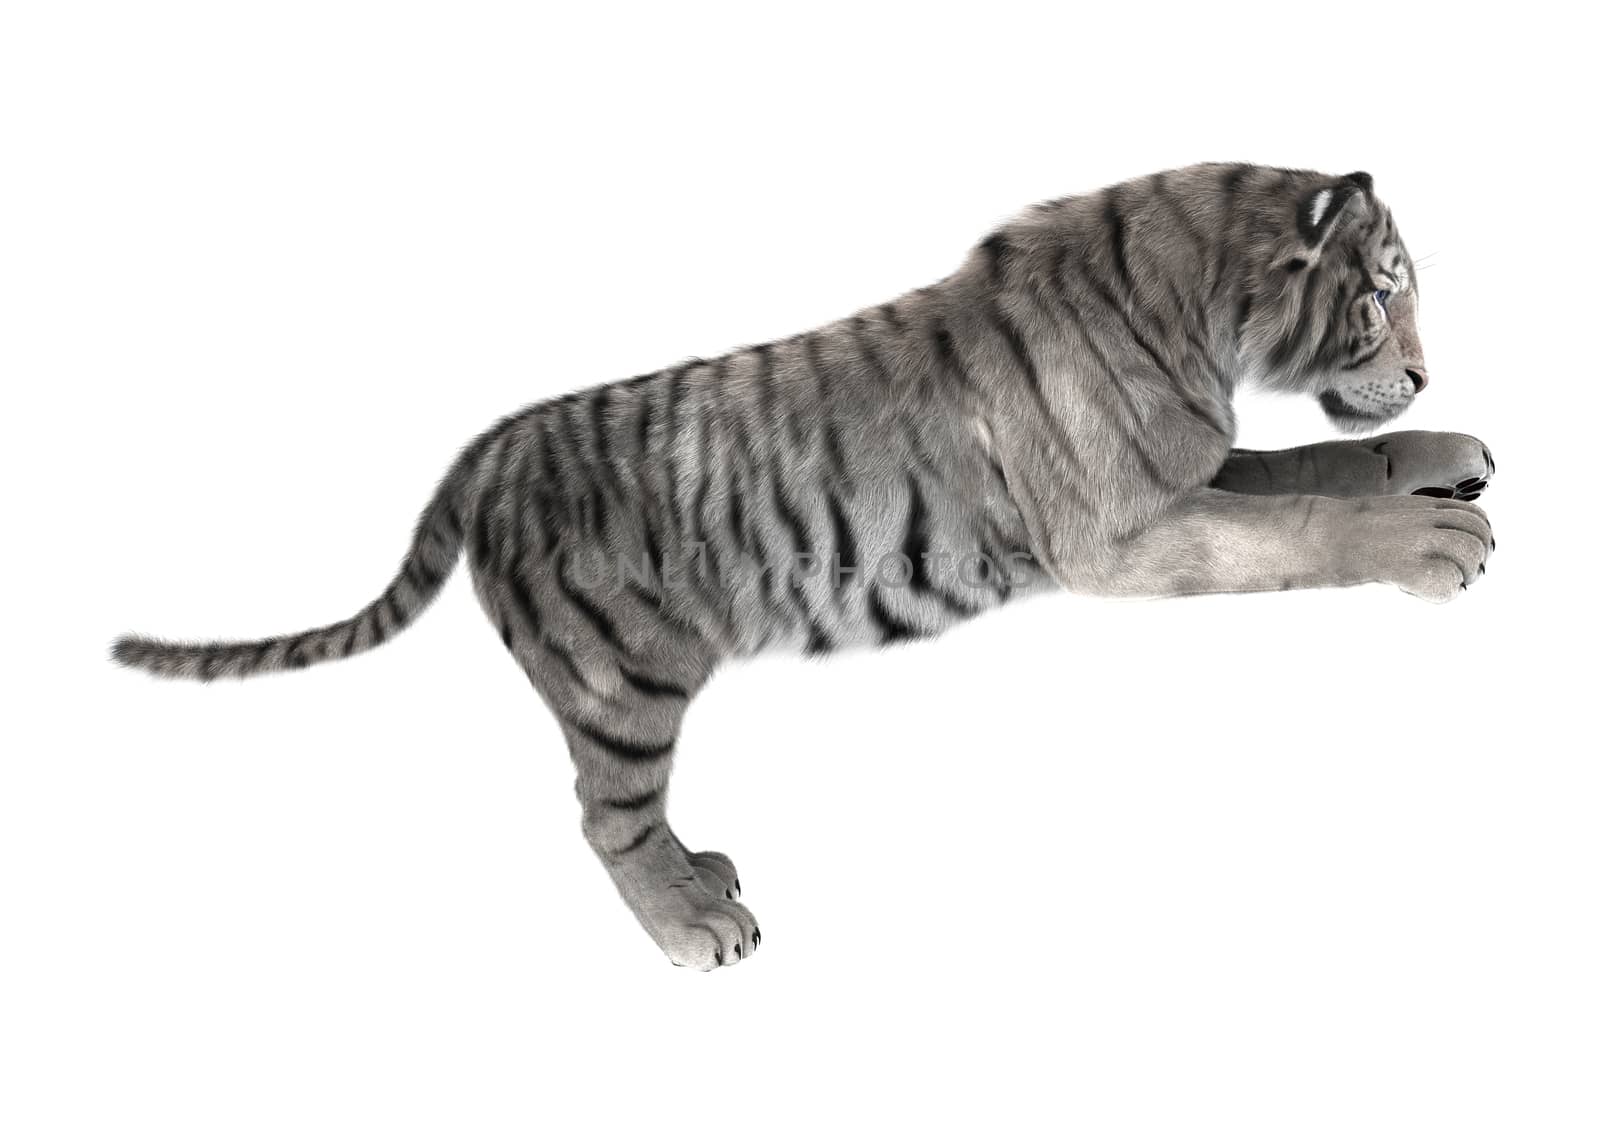 3D digital render of a white tiger isolated on white background